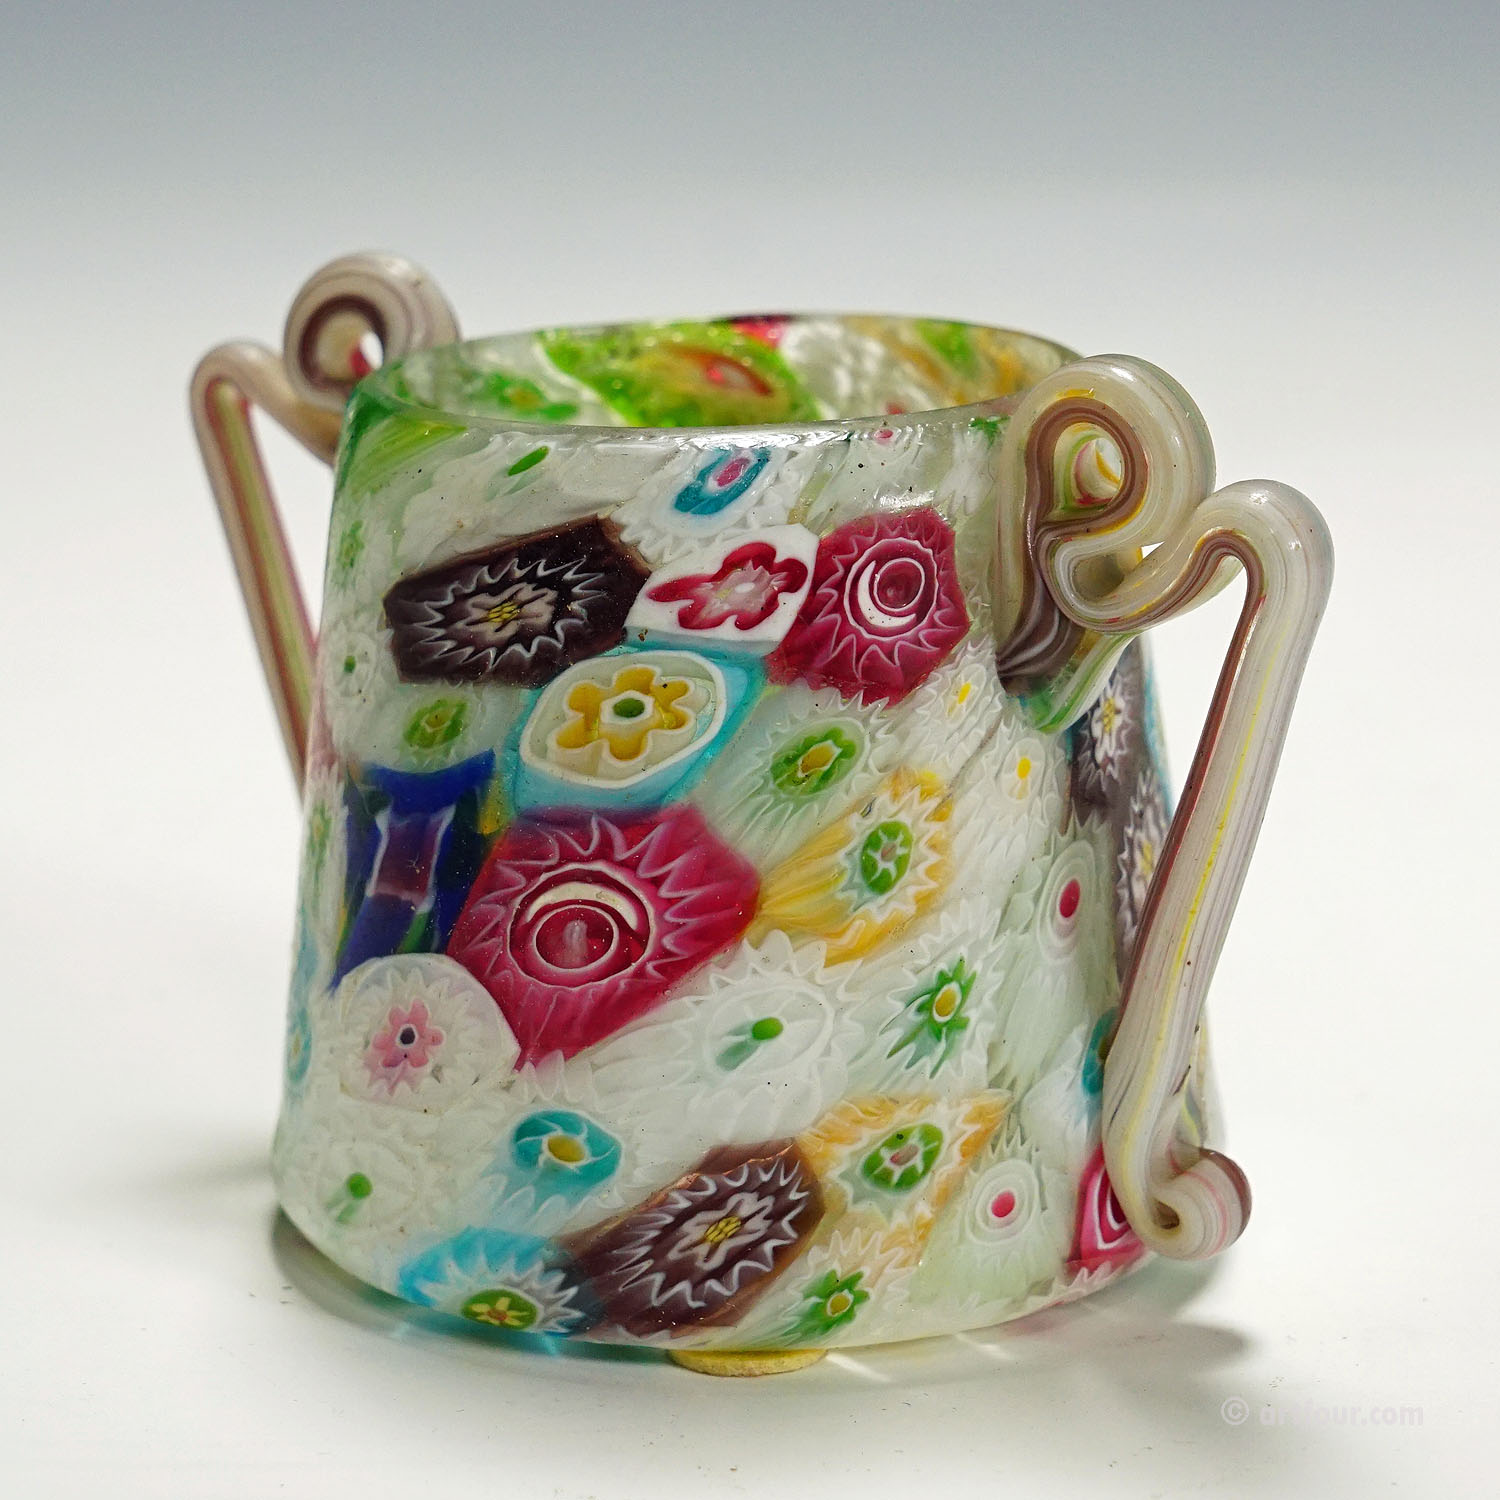 Antique Millefiori Goblet with Handles by Fratelli Toso, Murano circa 1910